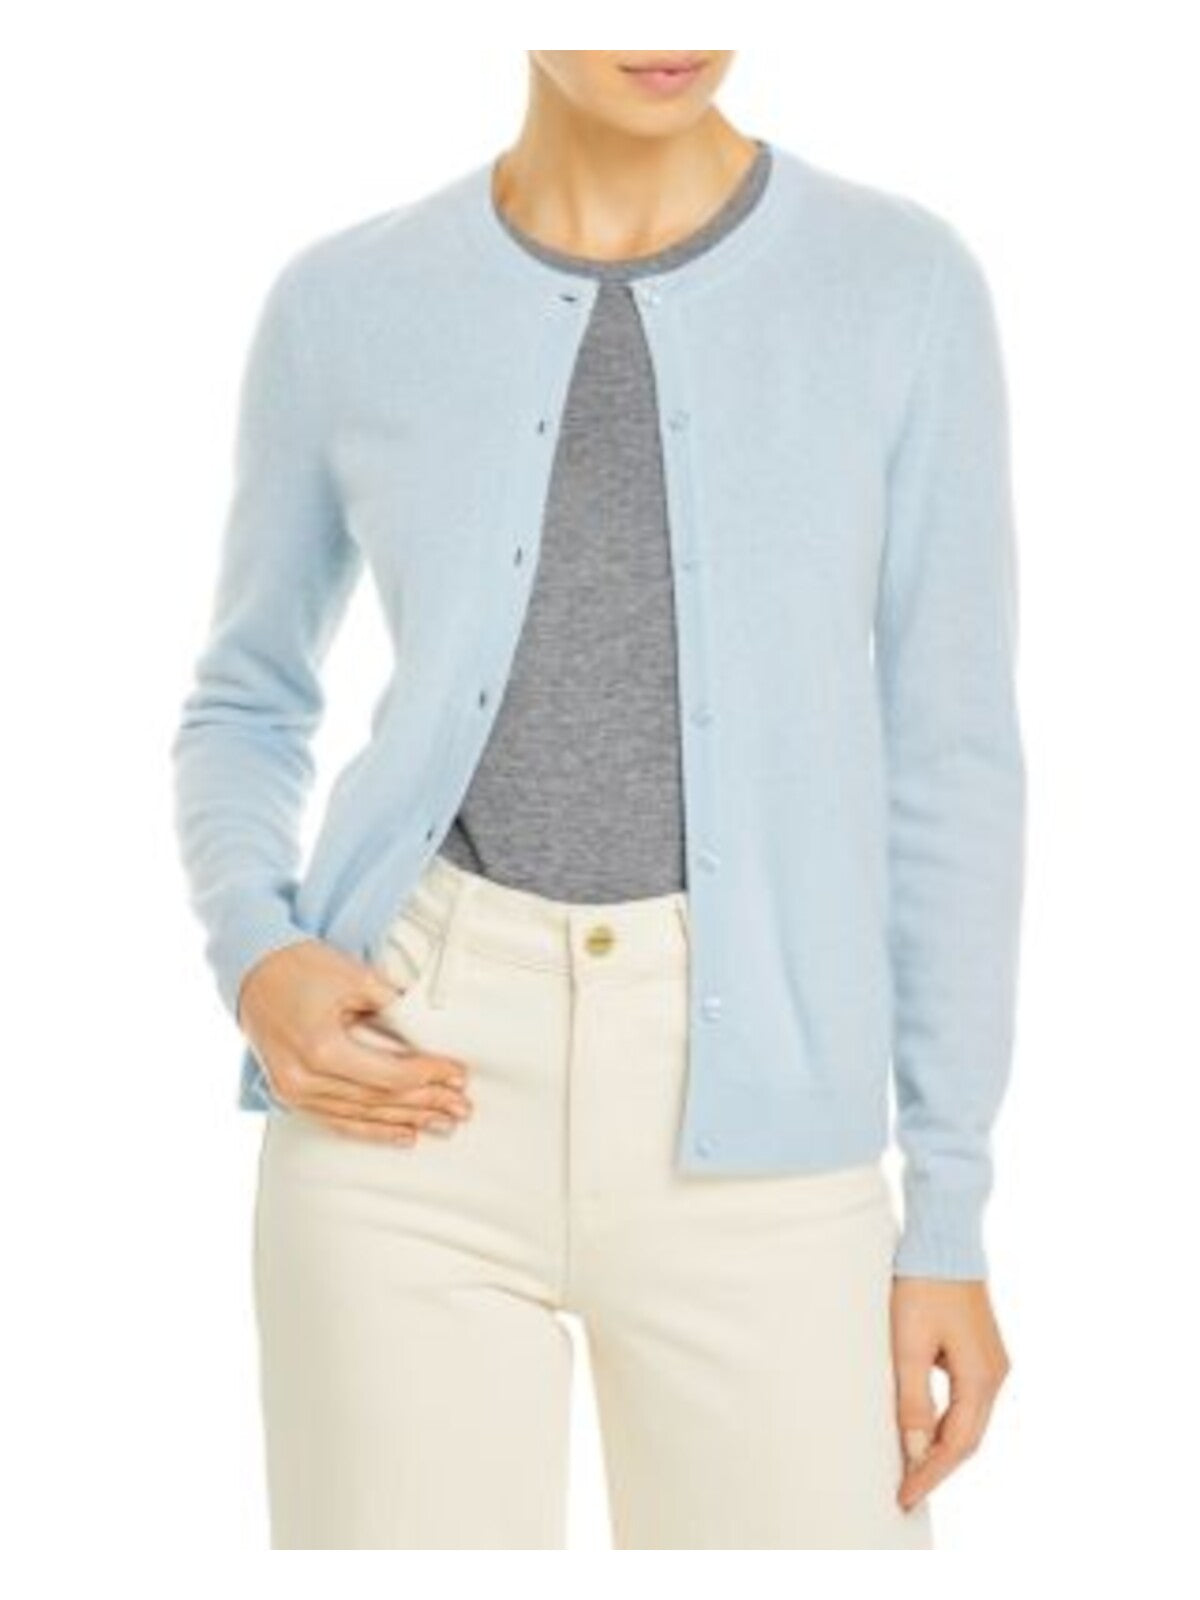 C Womens Light Blue Cashmere Long Sleeve Crew Neck Wear To Work Button Up Sweater XS